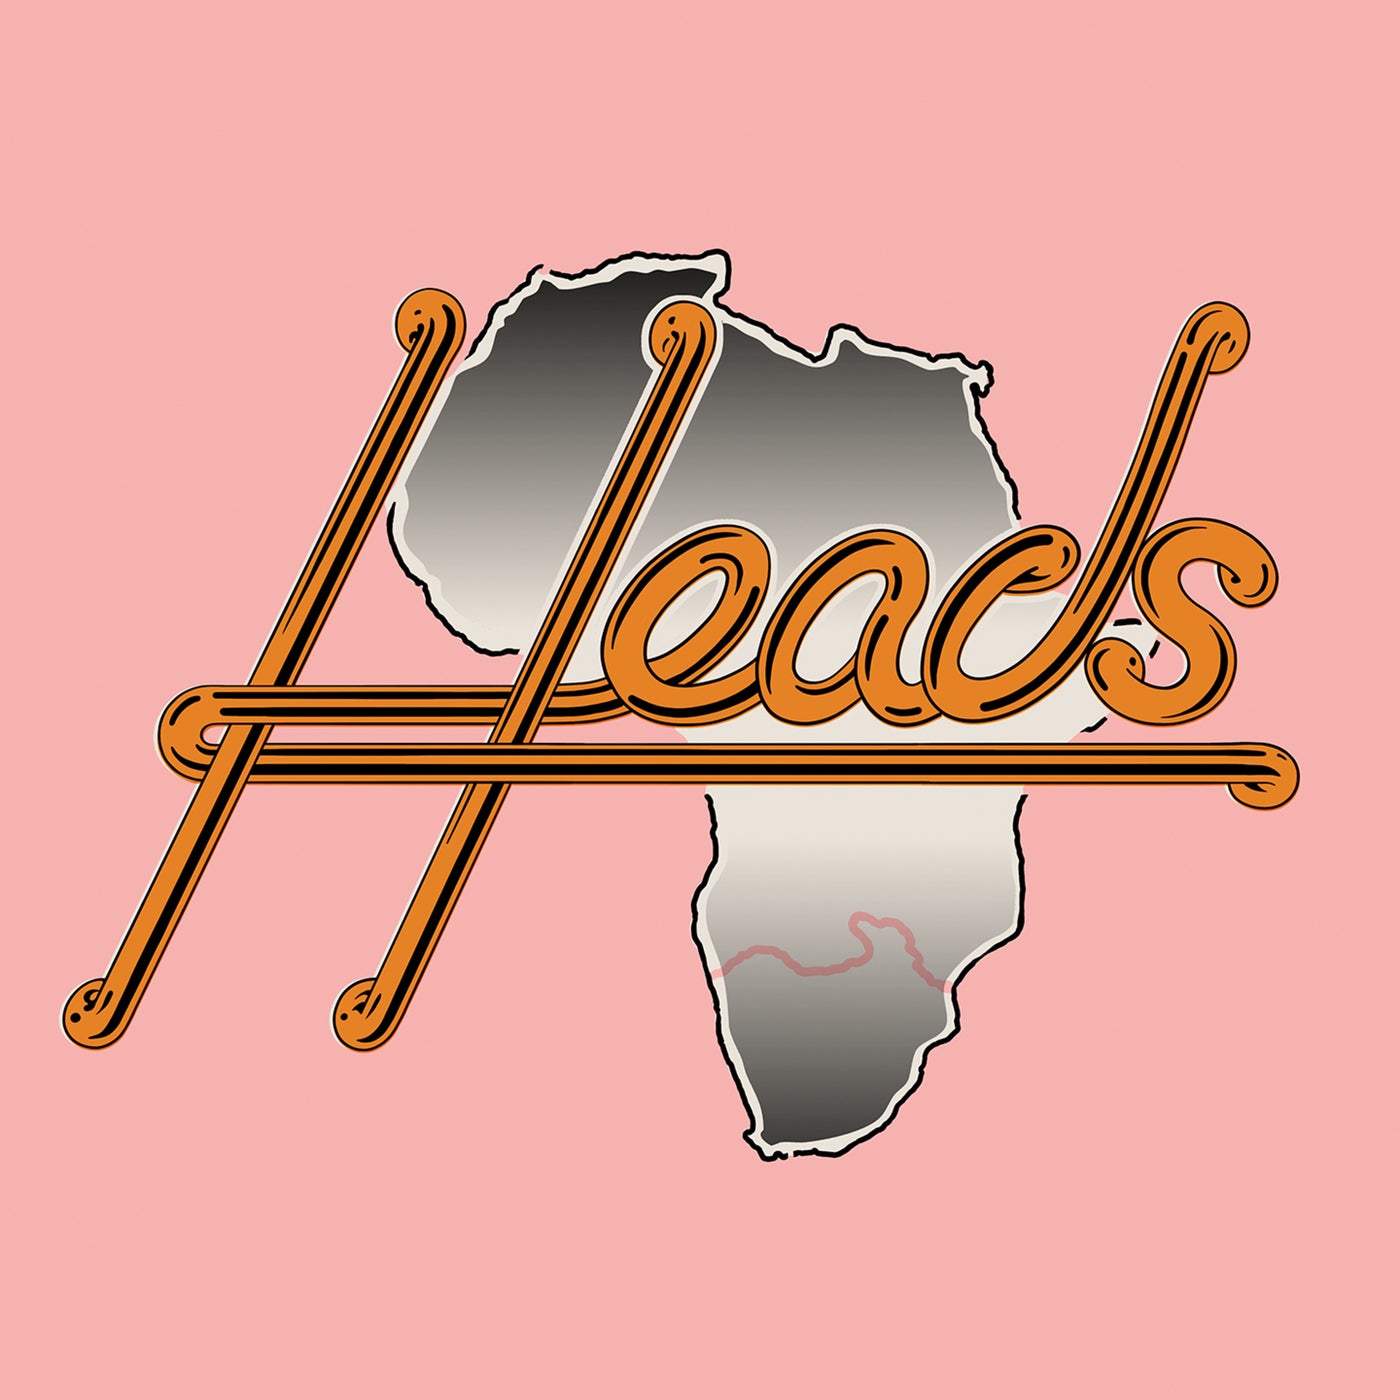 Heads Records - South African Disco-Dub Edits